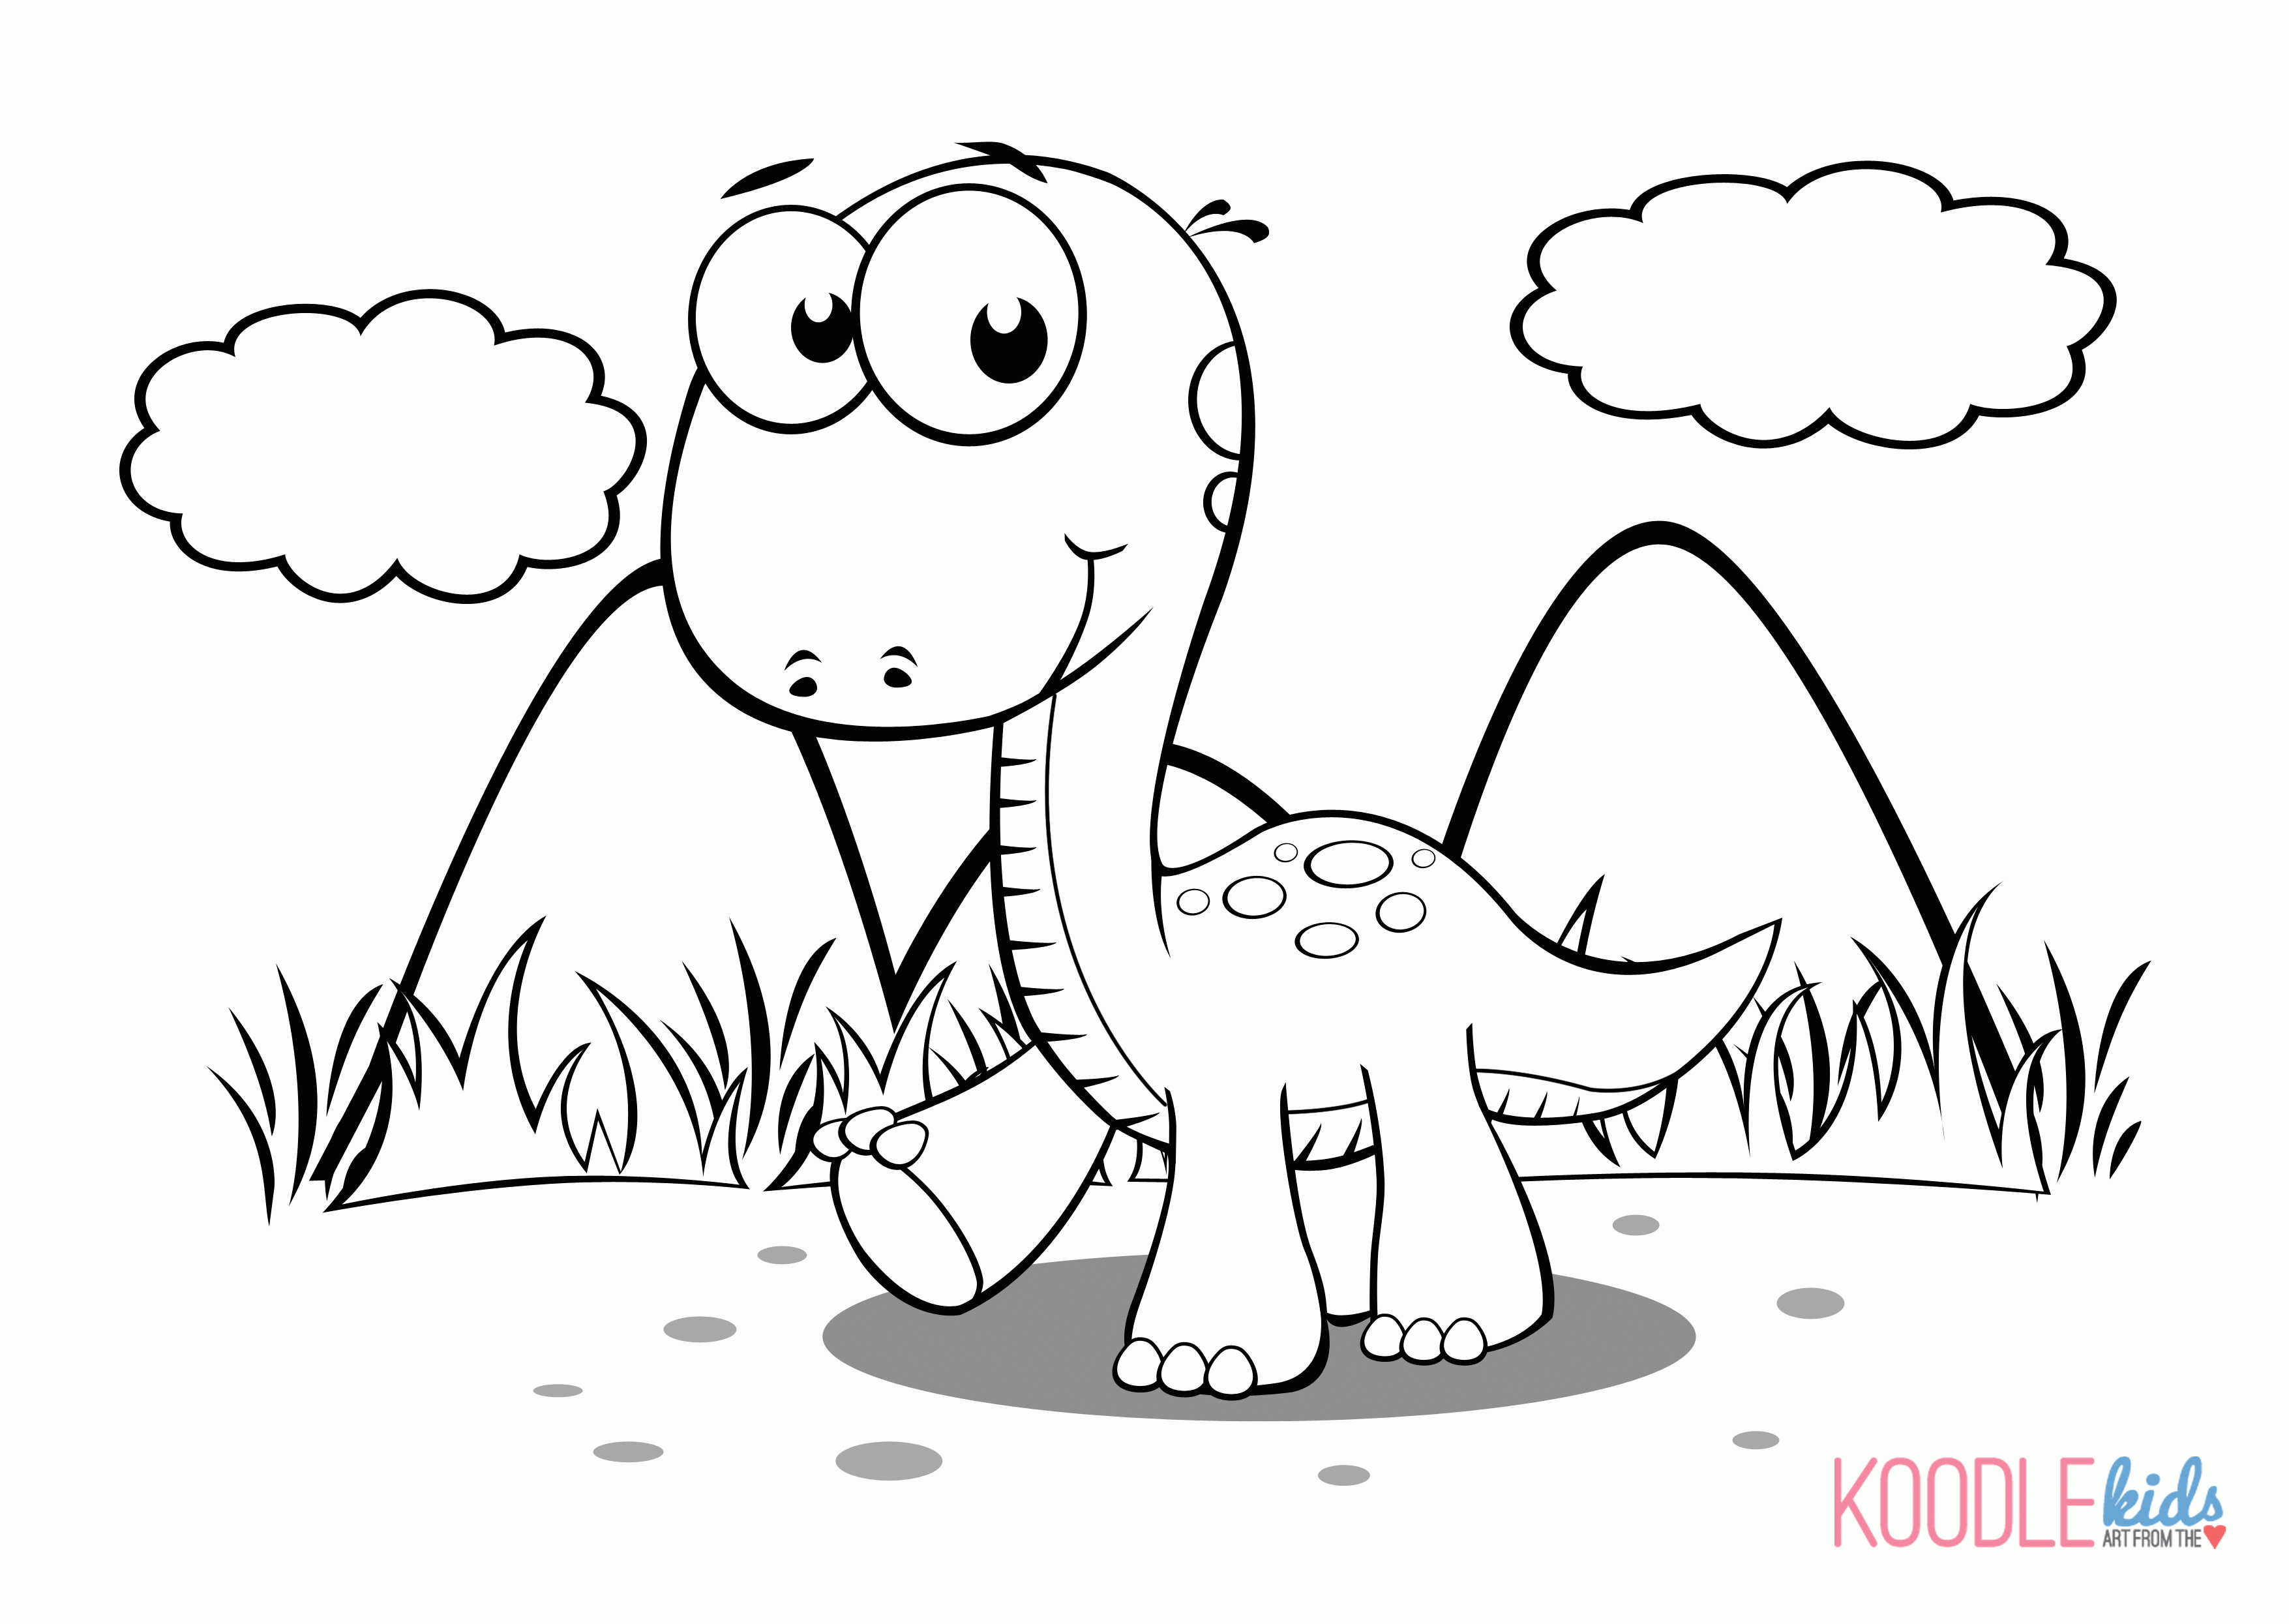 Easy Cute Baby Dinosaurs Coloring Pages #6452 Cute Baby Dinosaurs ...